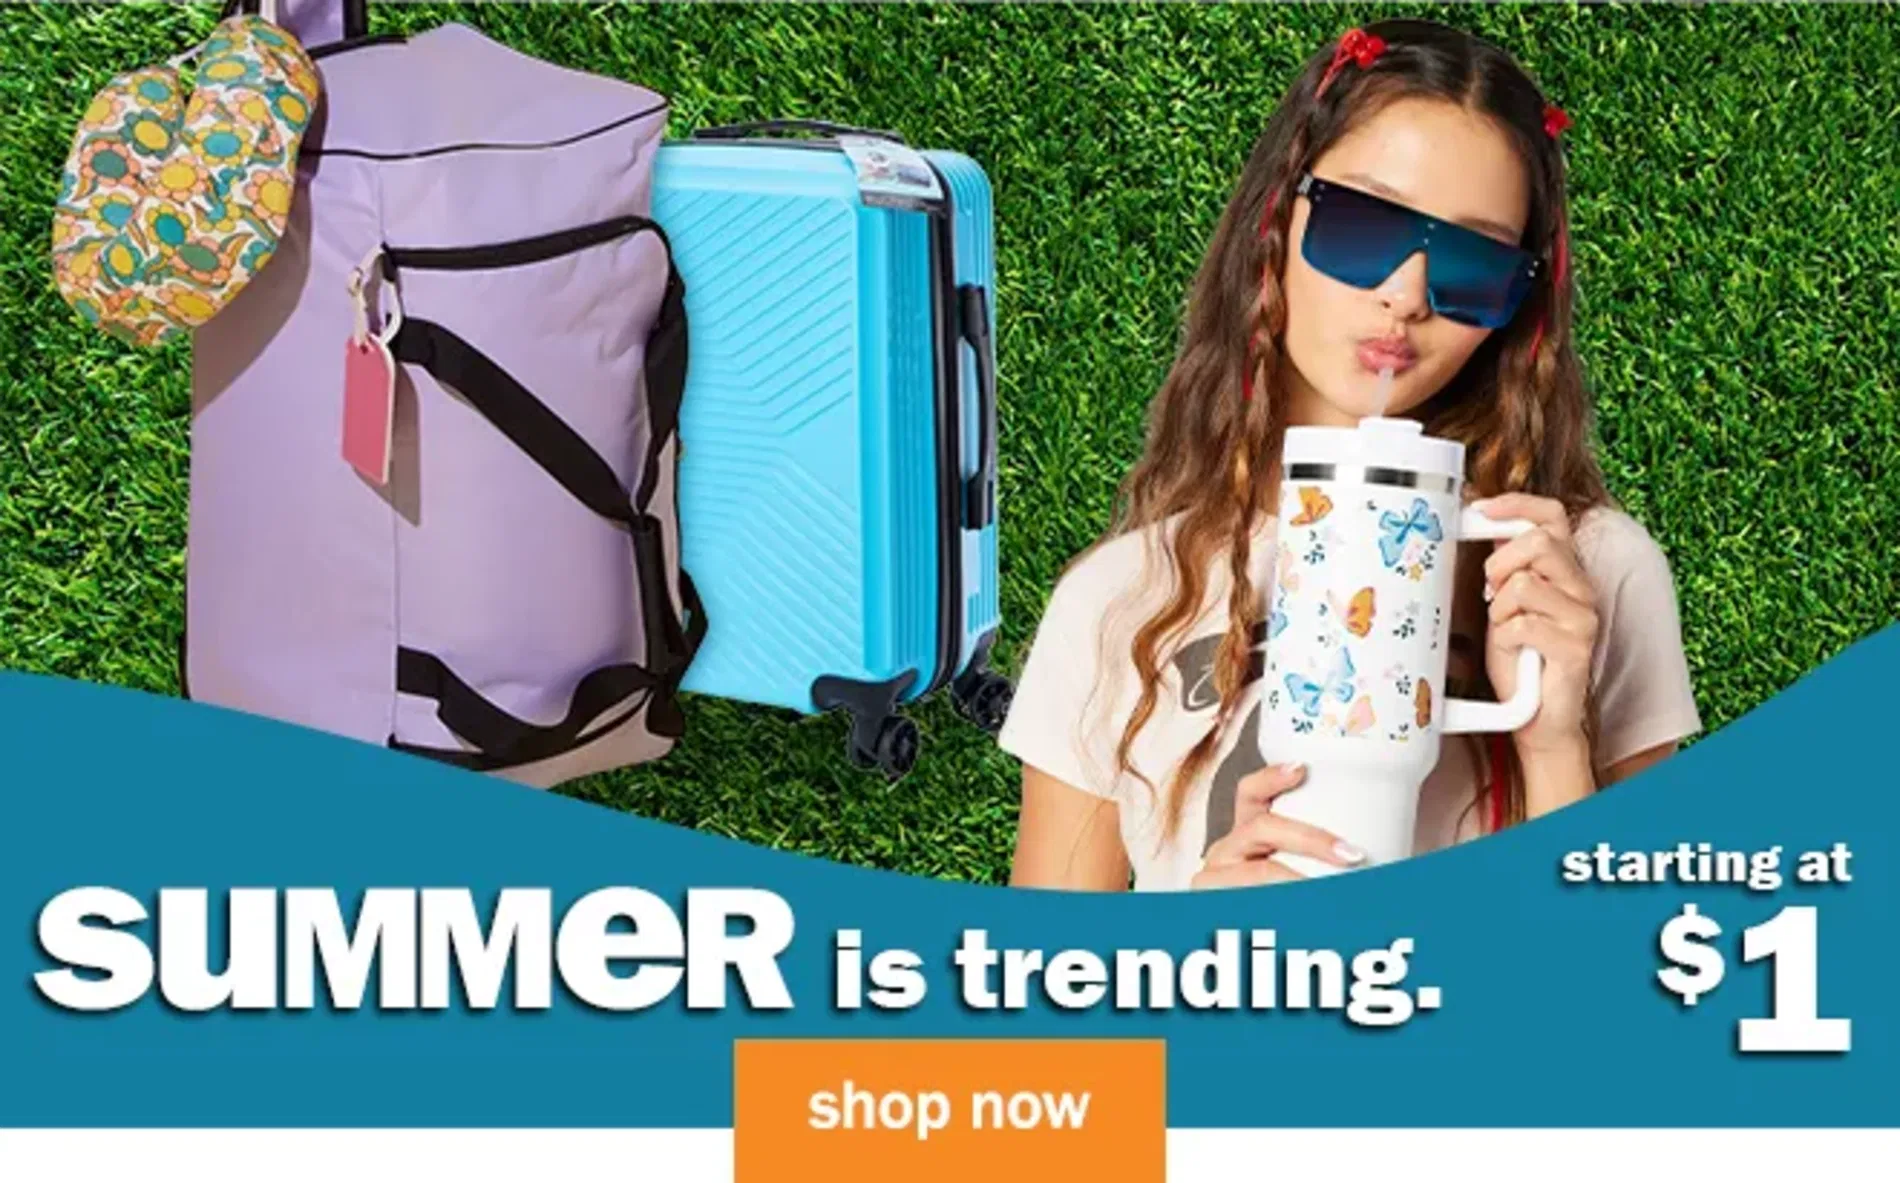 Summer Is Trending. Starting at $1. Shop Now. Go Big With Hot Deals on All Aspects of the Season!